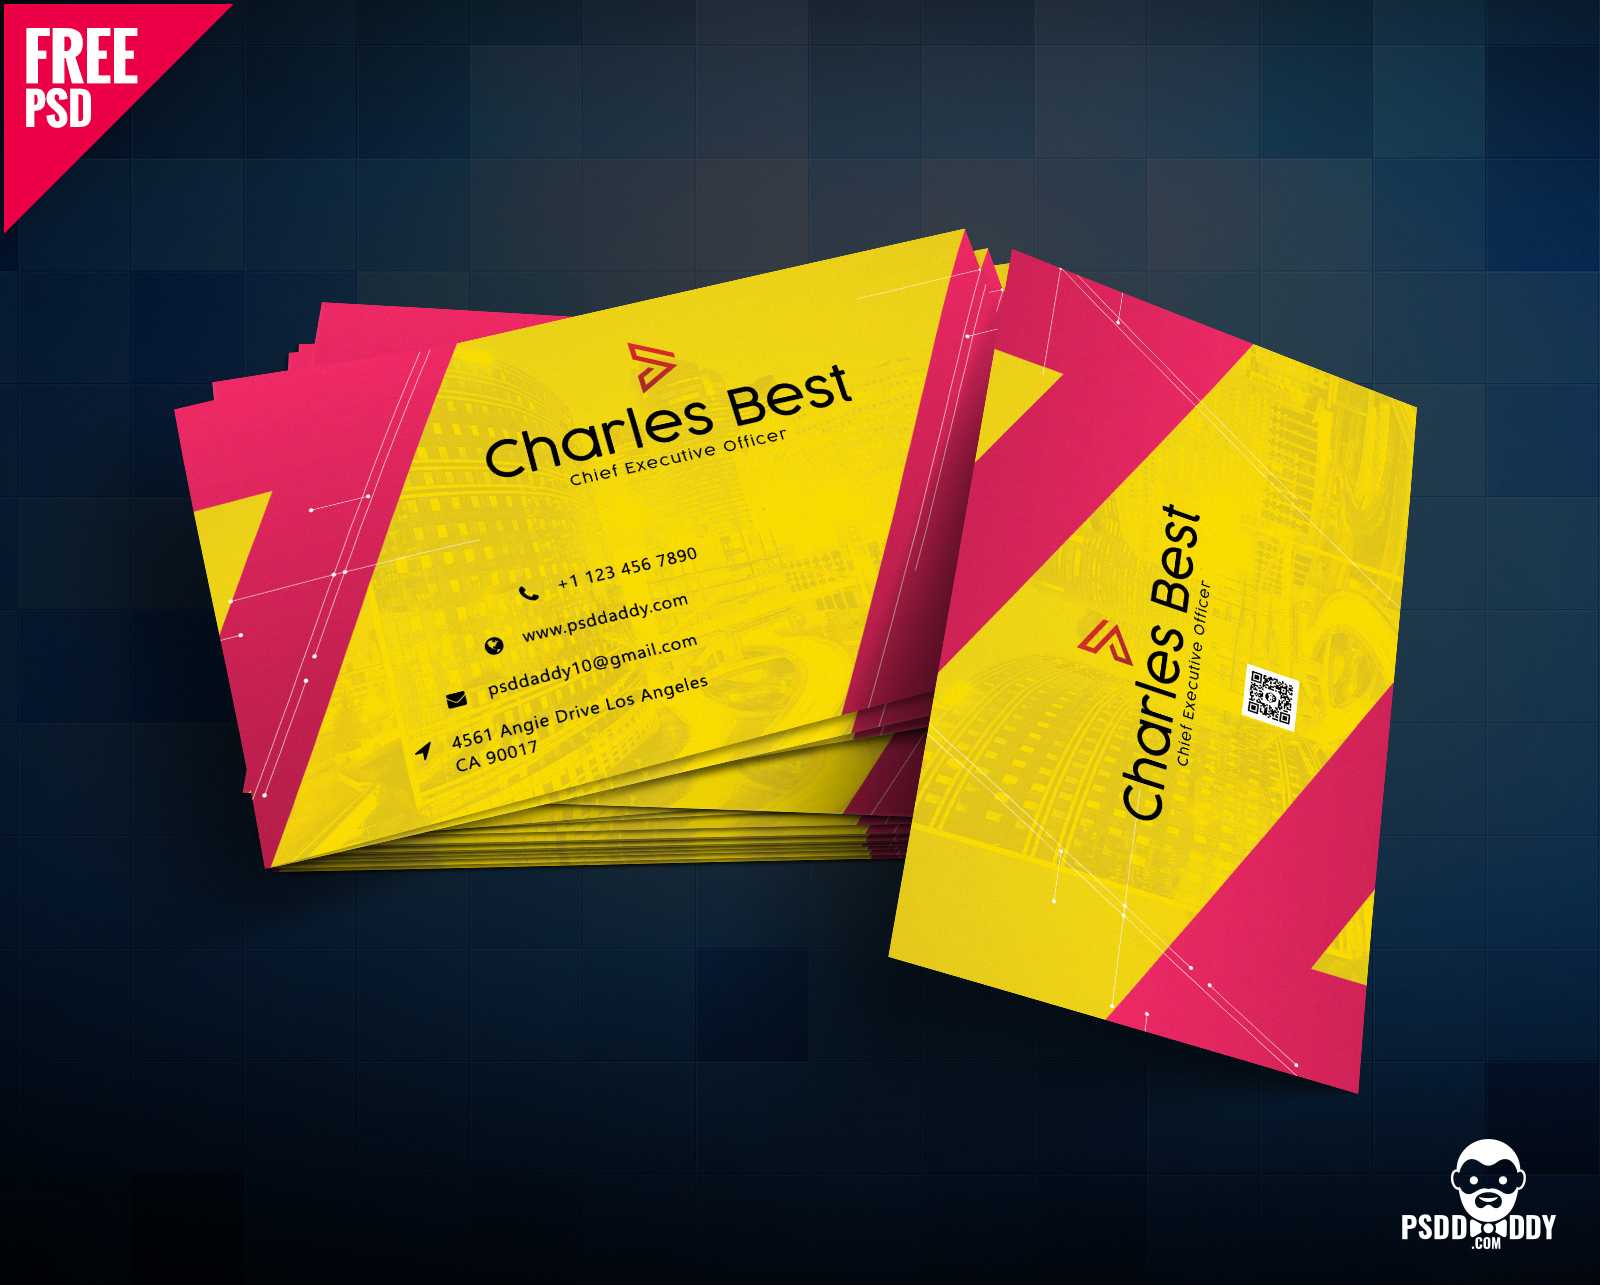 Download] Creative Business Card Free Psd | Psddaddy Inside Free Psd Visiting Card Templates Download